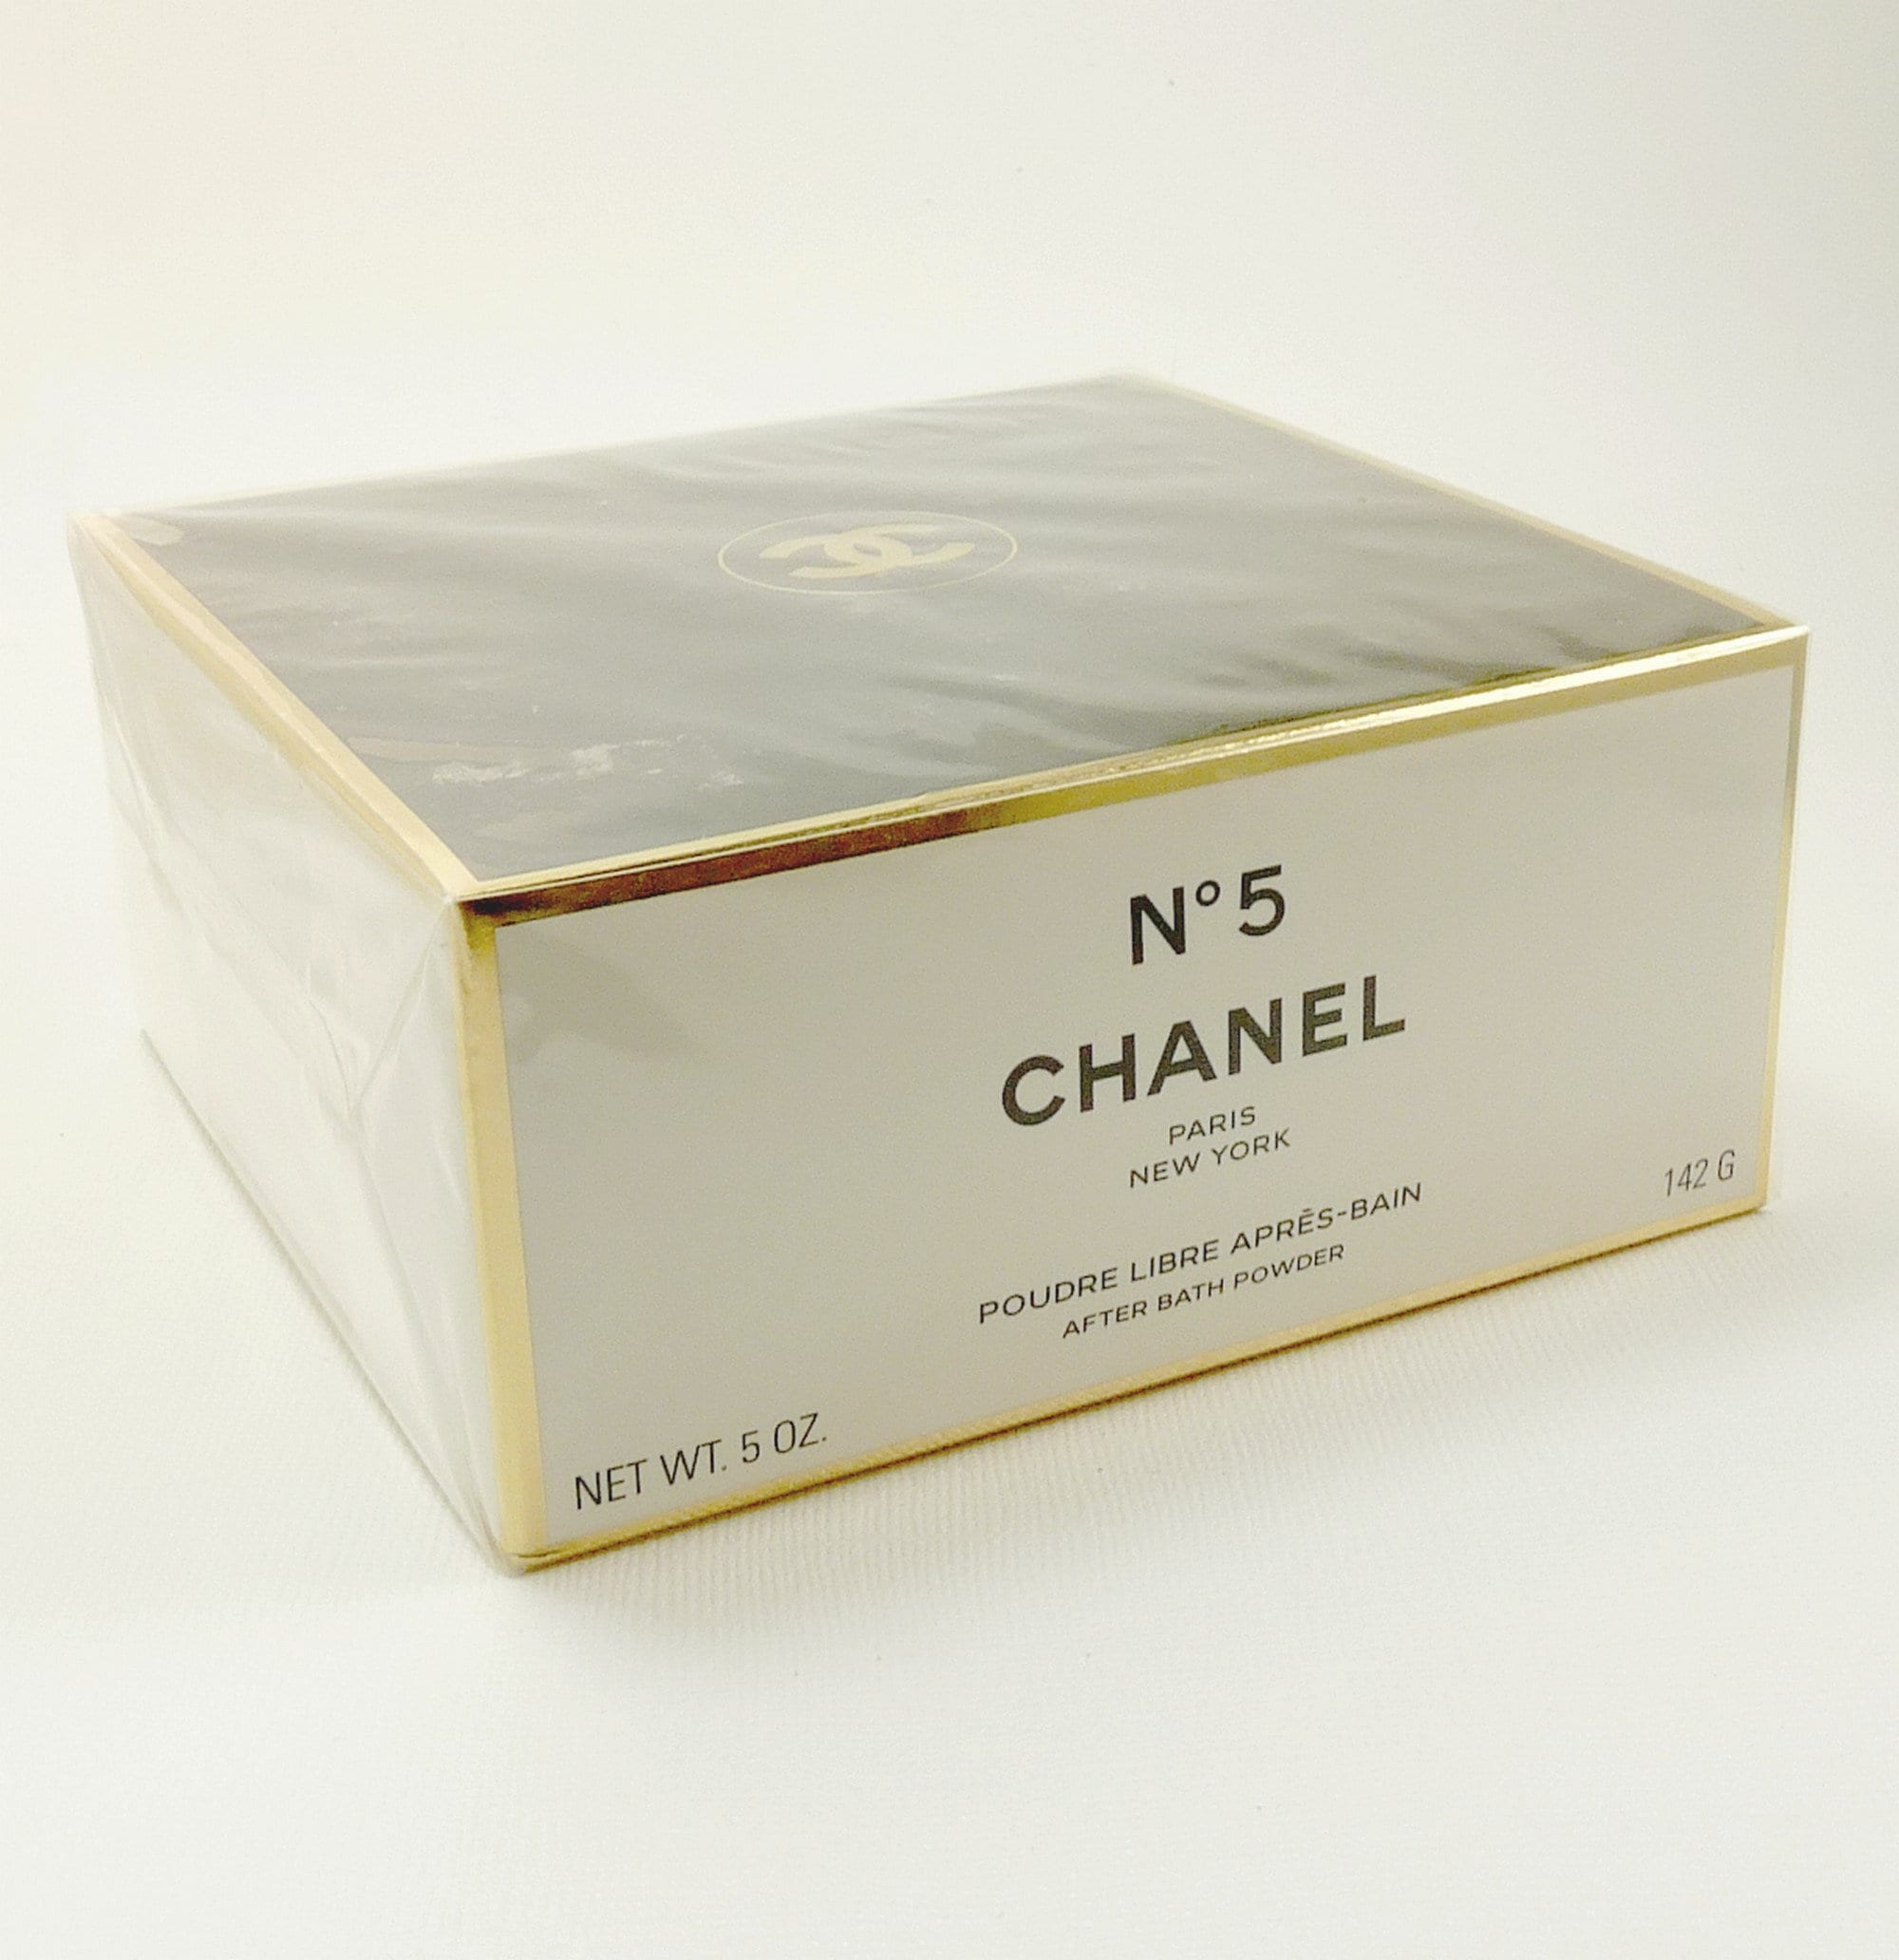 Chanel No 5 After Bath Body Powder 5 OZ New Old Stock Boxed 